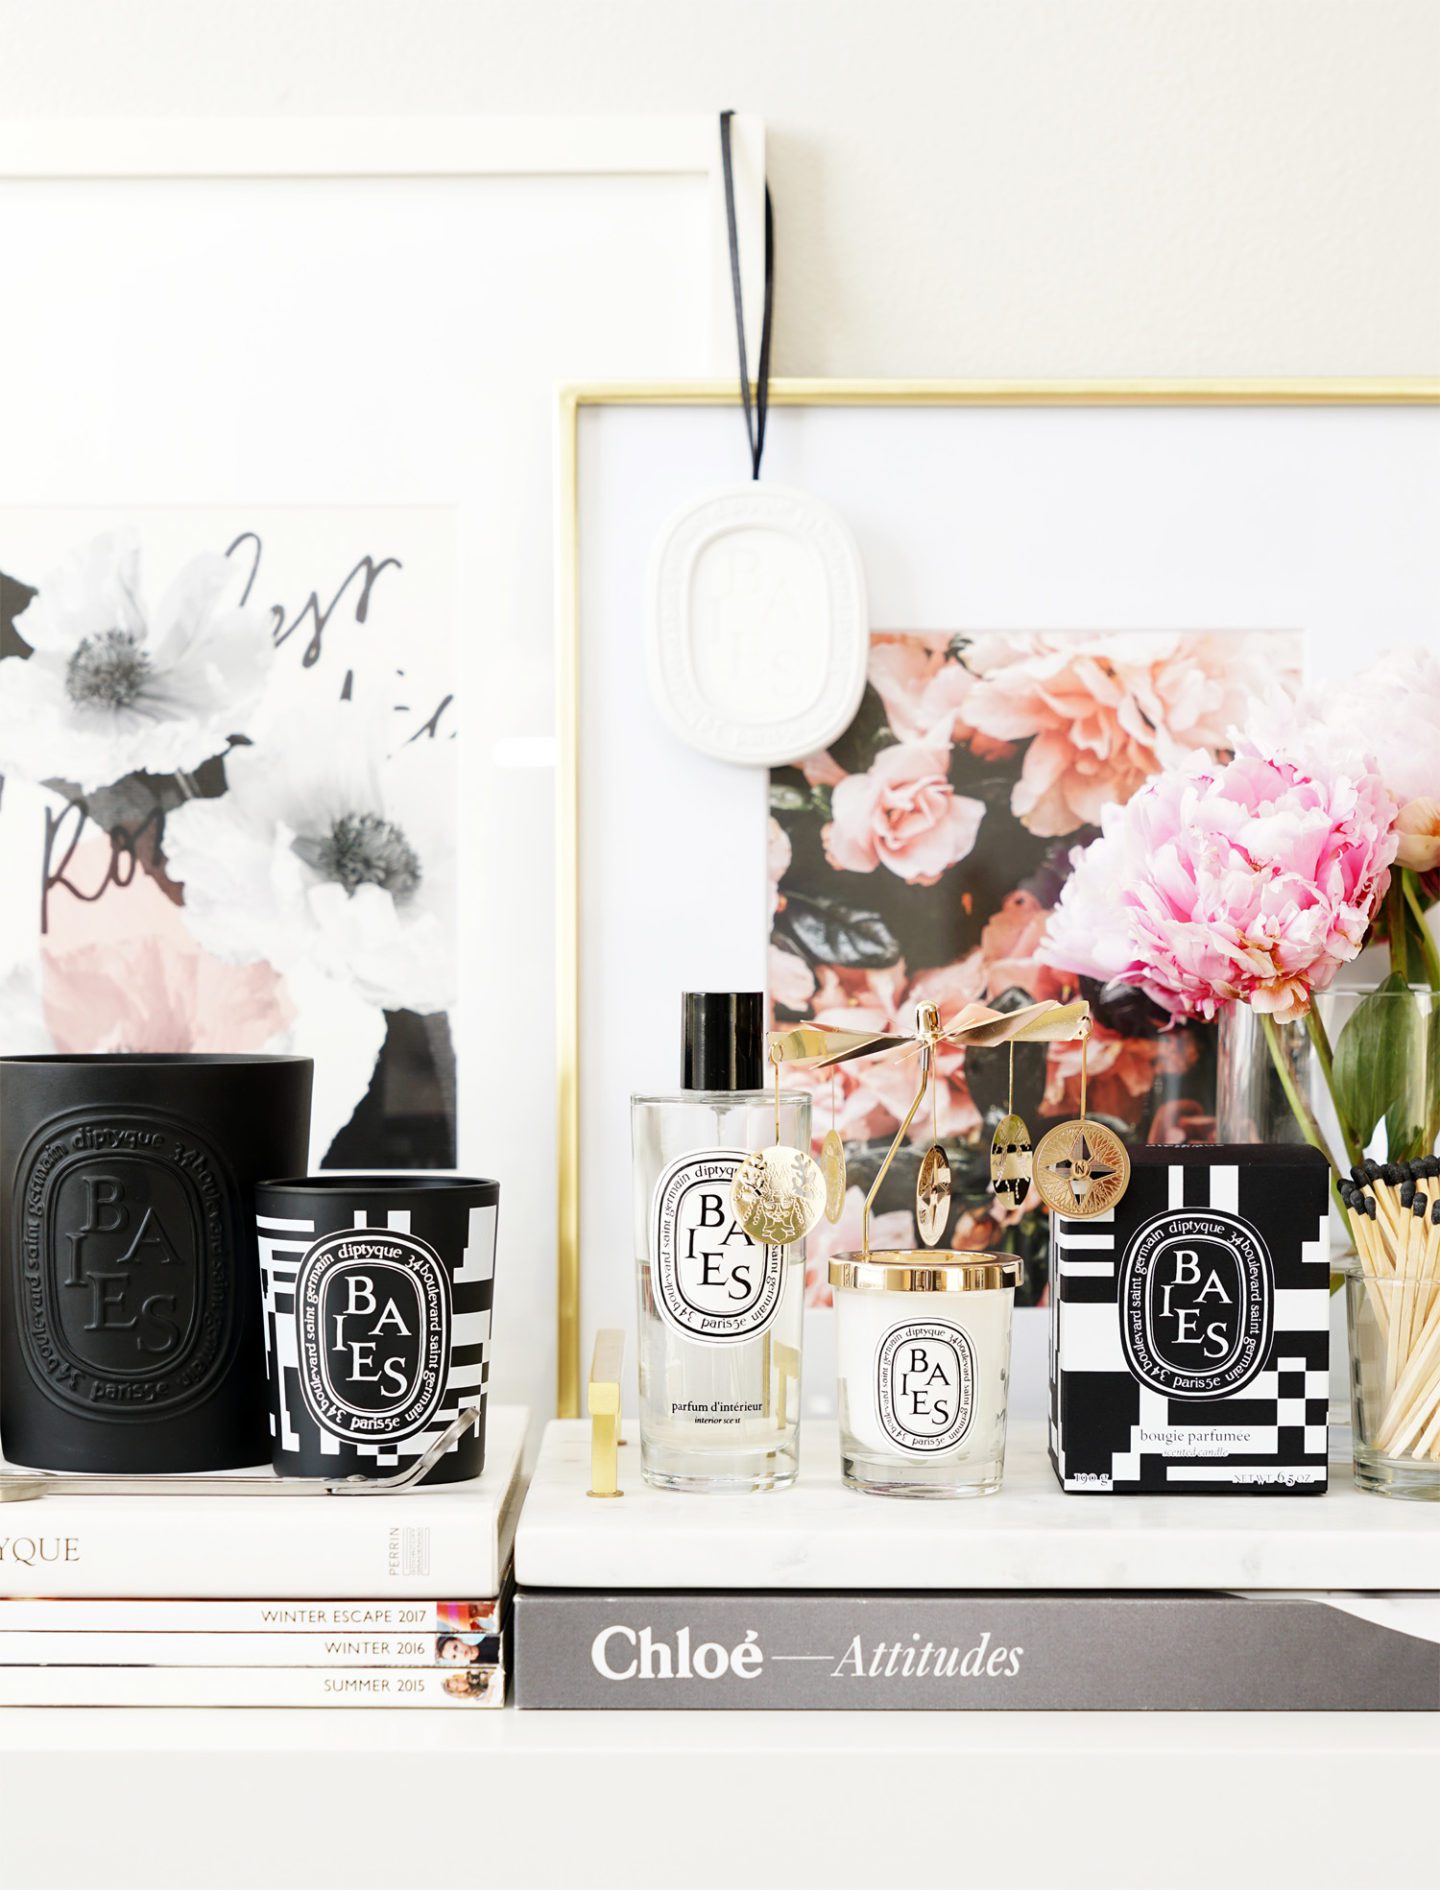 Diptyque Baies Candle and Black Friday 2018 Edition | The Beauty Look Book